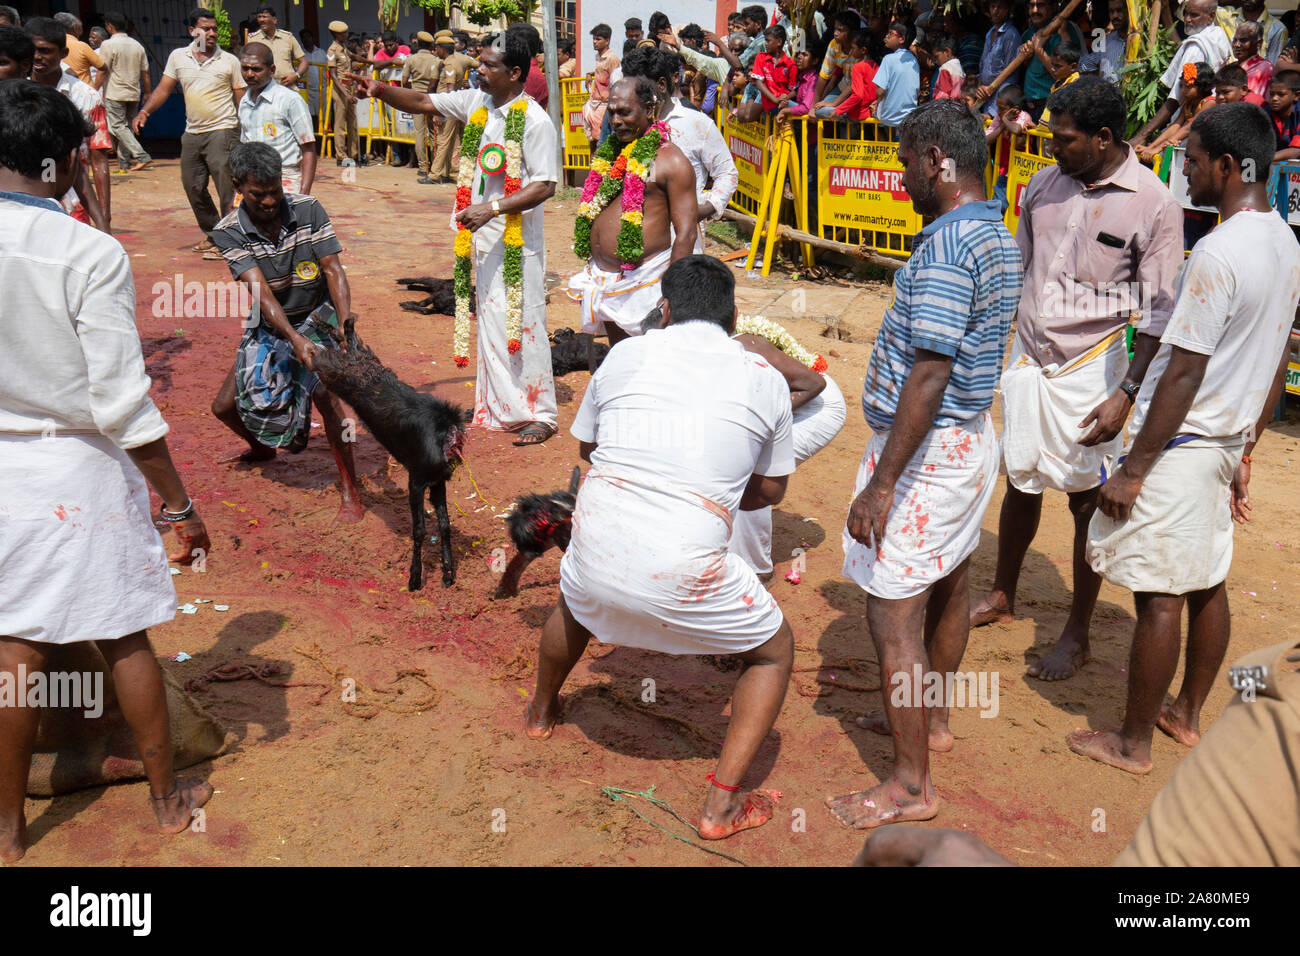 Devotees sacrificing a goat during Kutti Kudithal Festival in Trichy, Tamil Nadu, India Stock Photo